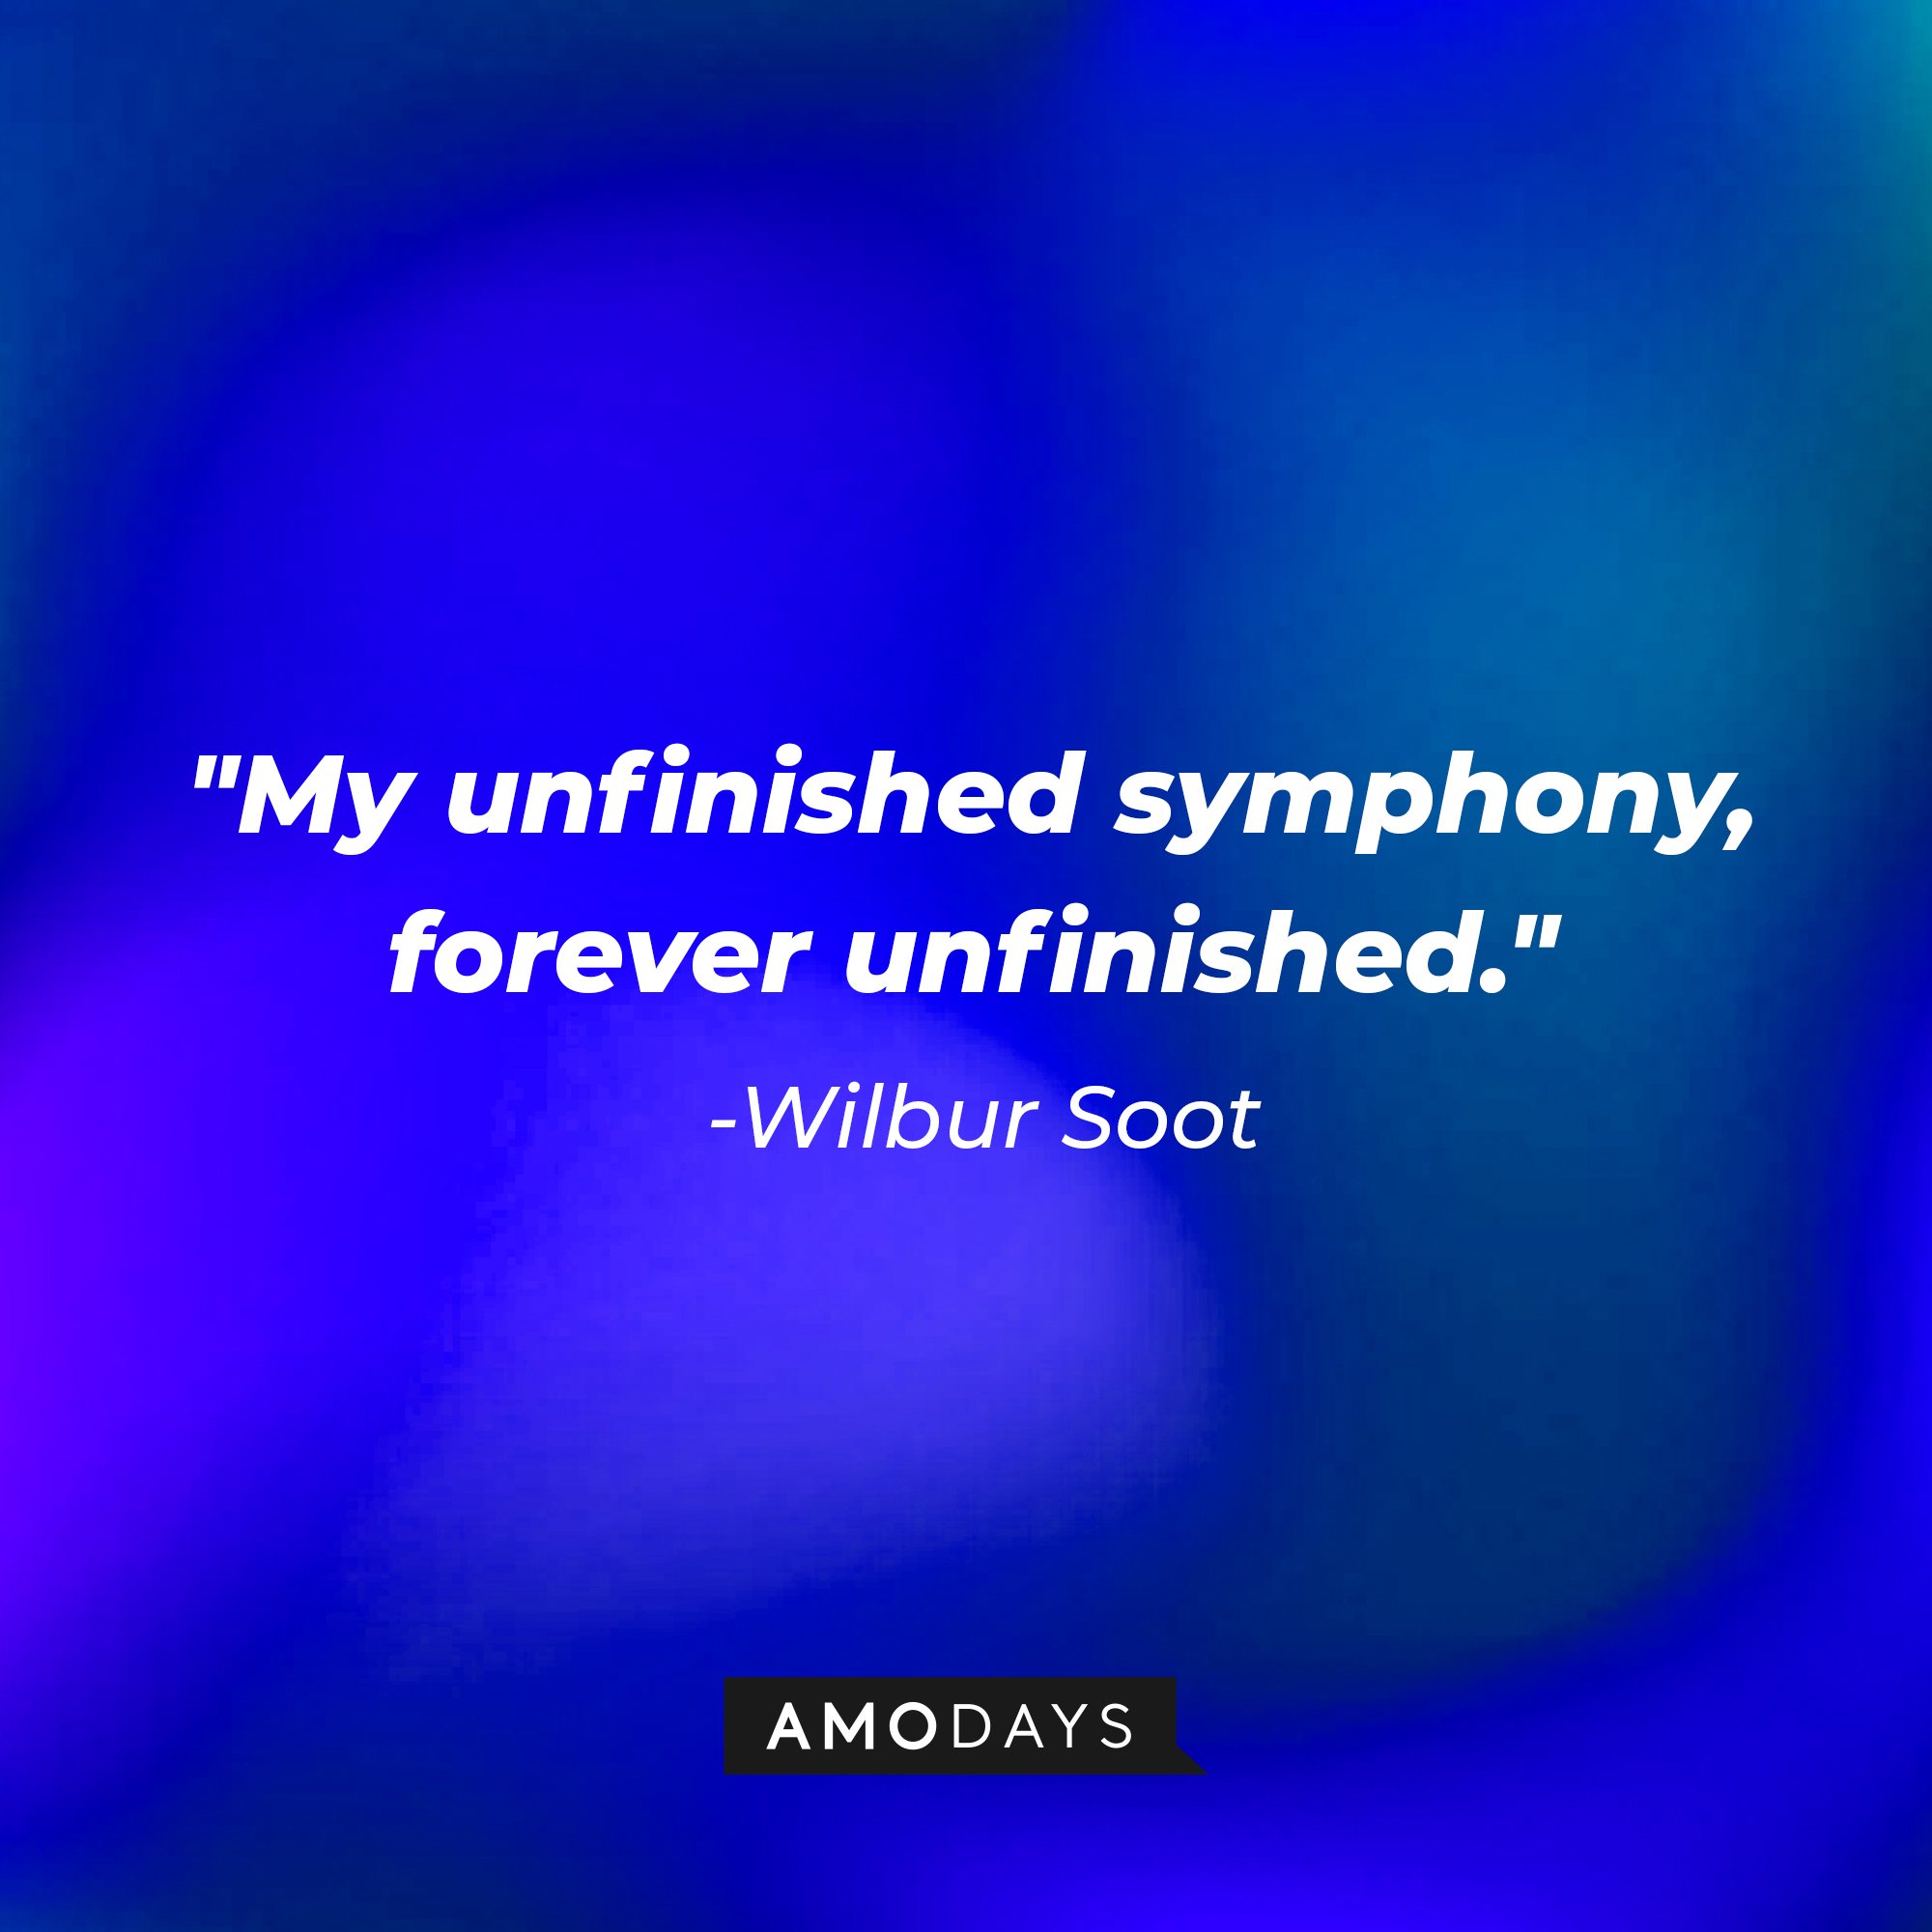 Wilbur Soot's quote: "My unfinished symphony, forever unfinished." | Image: AmoDays